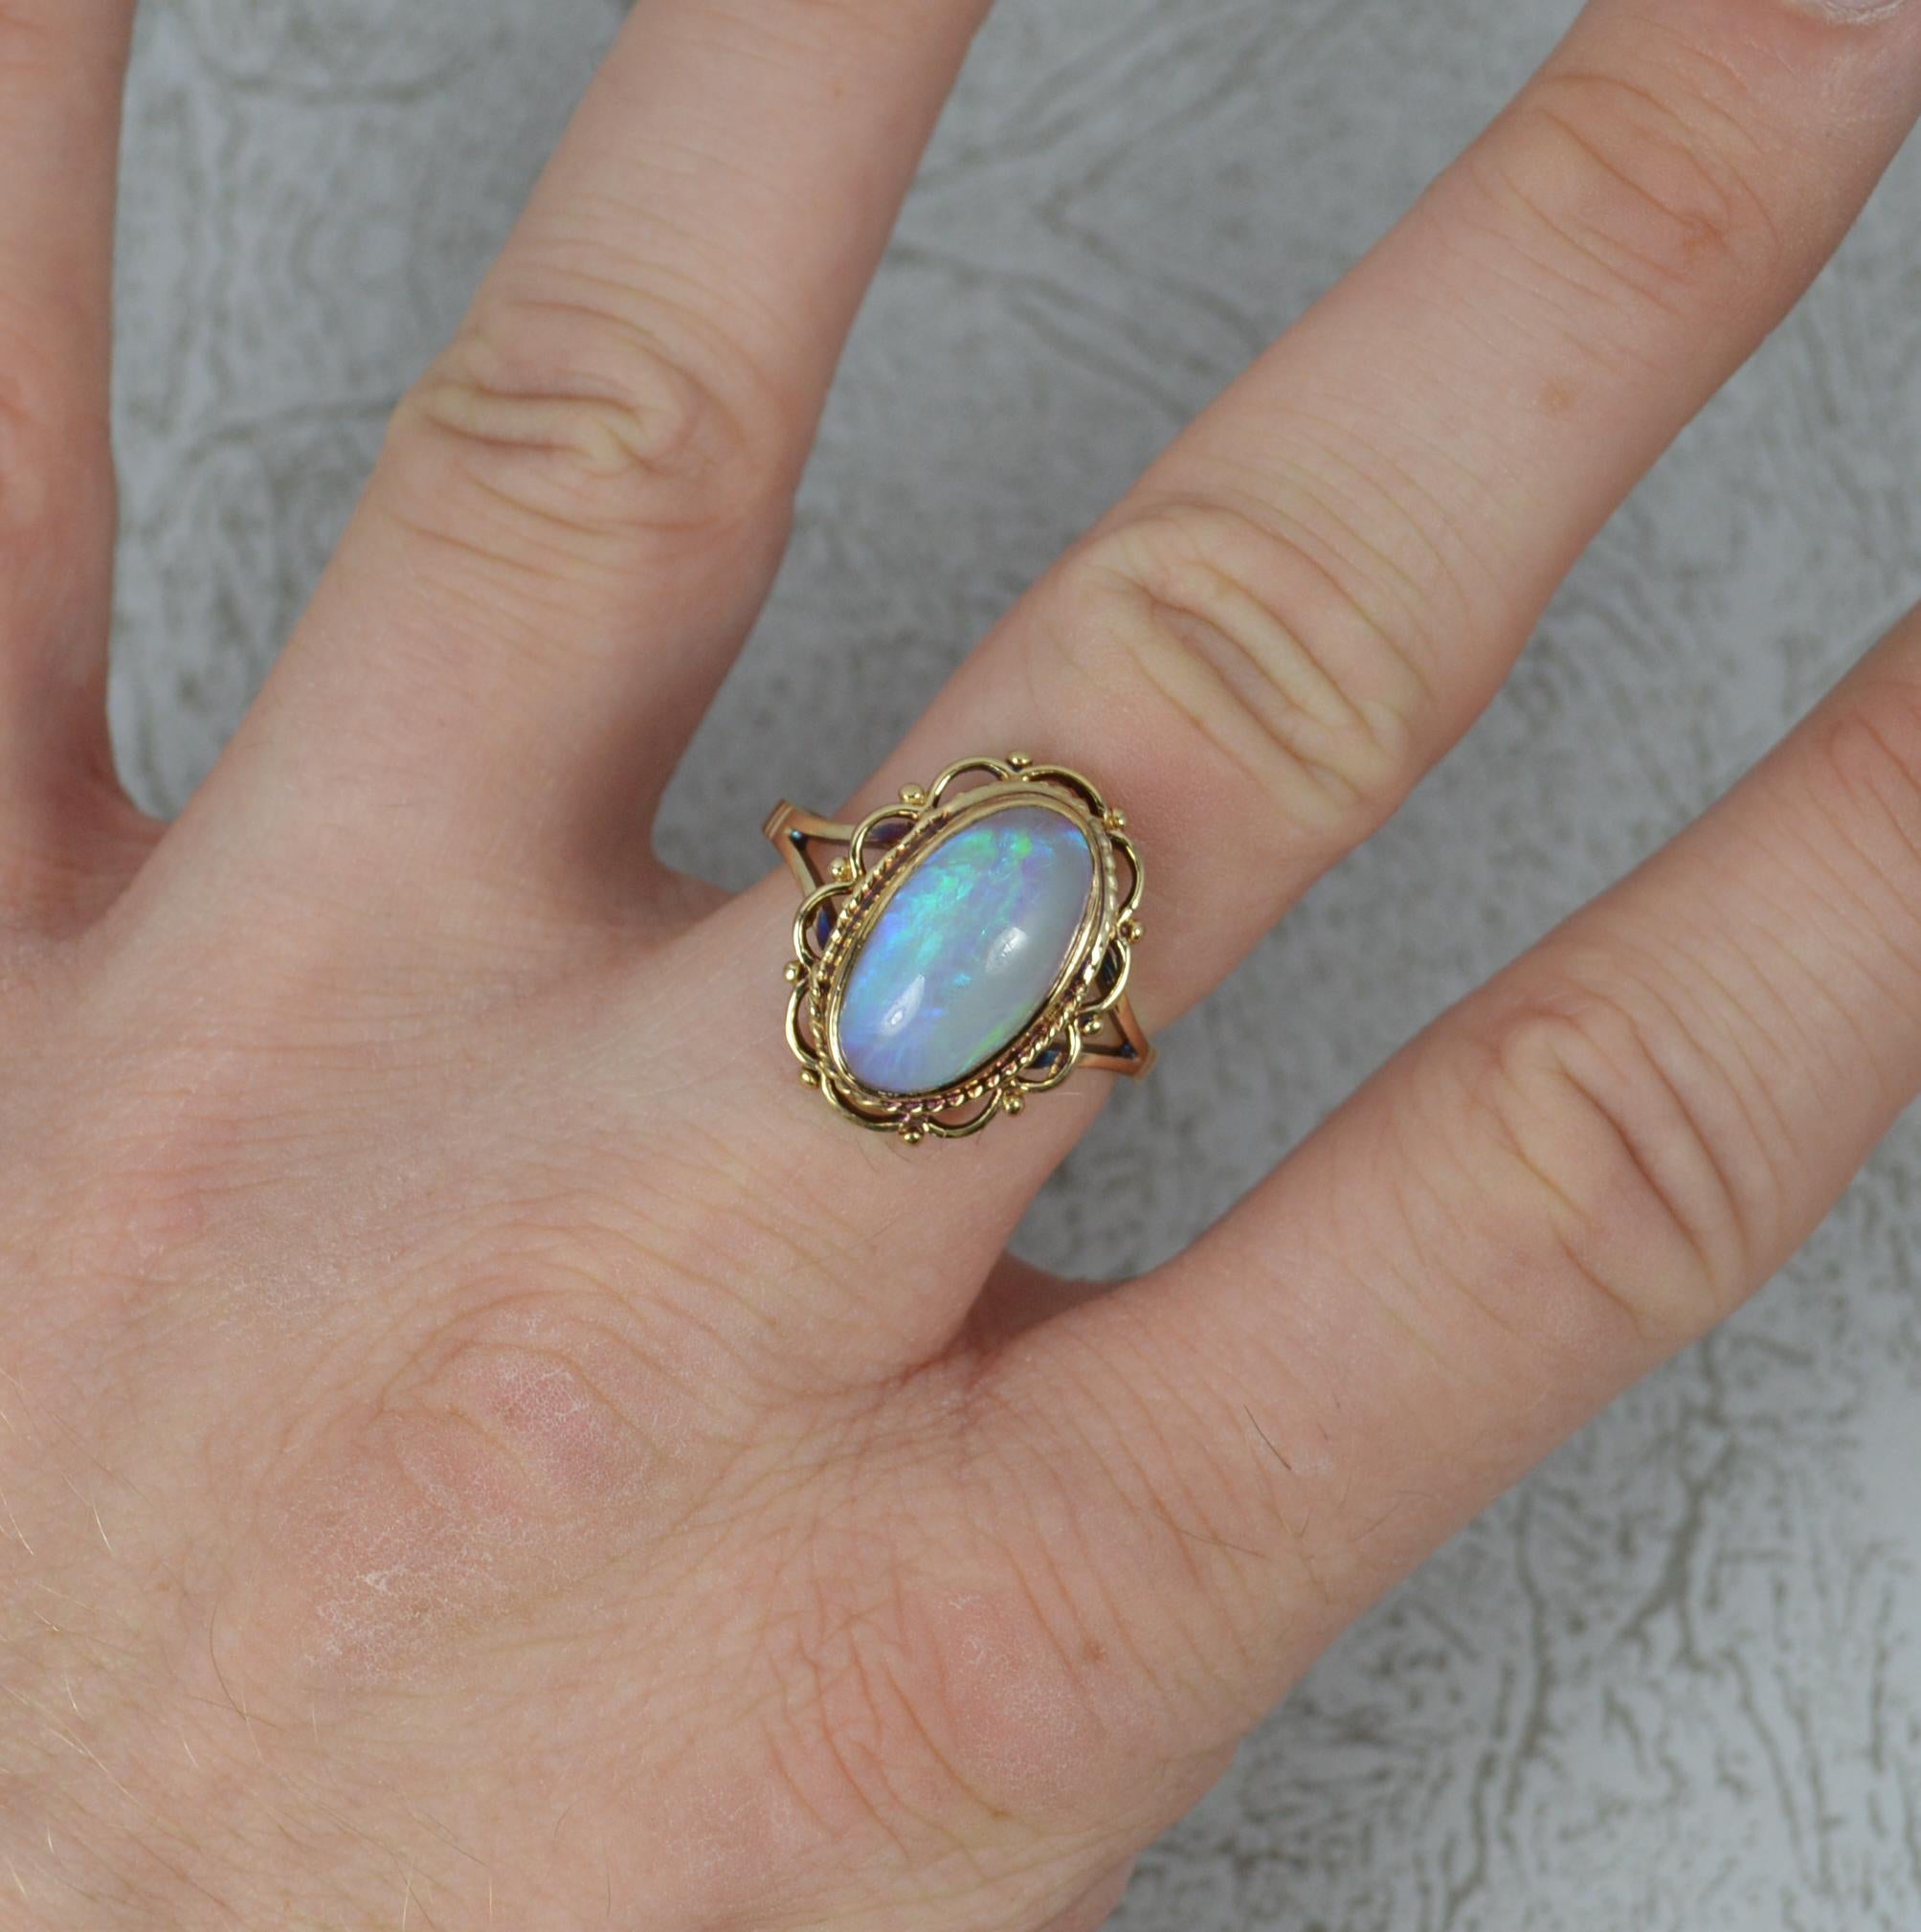 A beautiful ladies opal ring. Solid 9 carat yellow ring. Opal to the centre measures 8mm x 14.5mm and is full of deep blue, green and red colours.

Condition ; Excellent. Clean ring. Strong, round band. Securely set stone.

Please view photographs